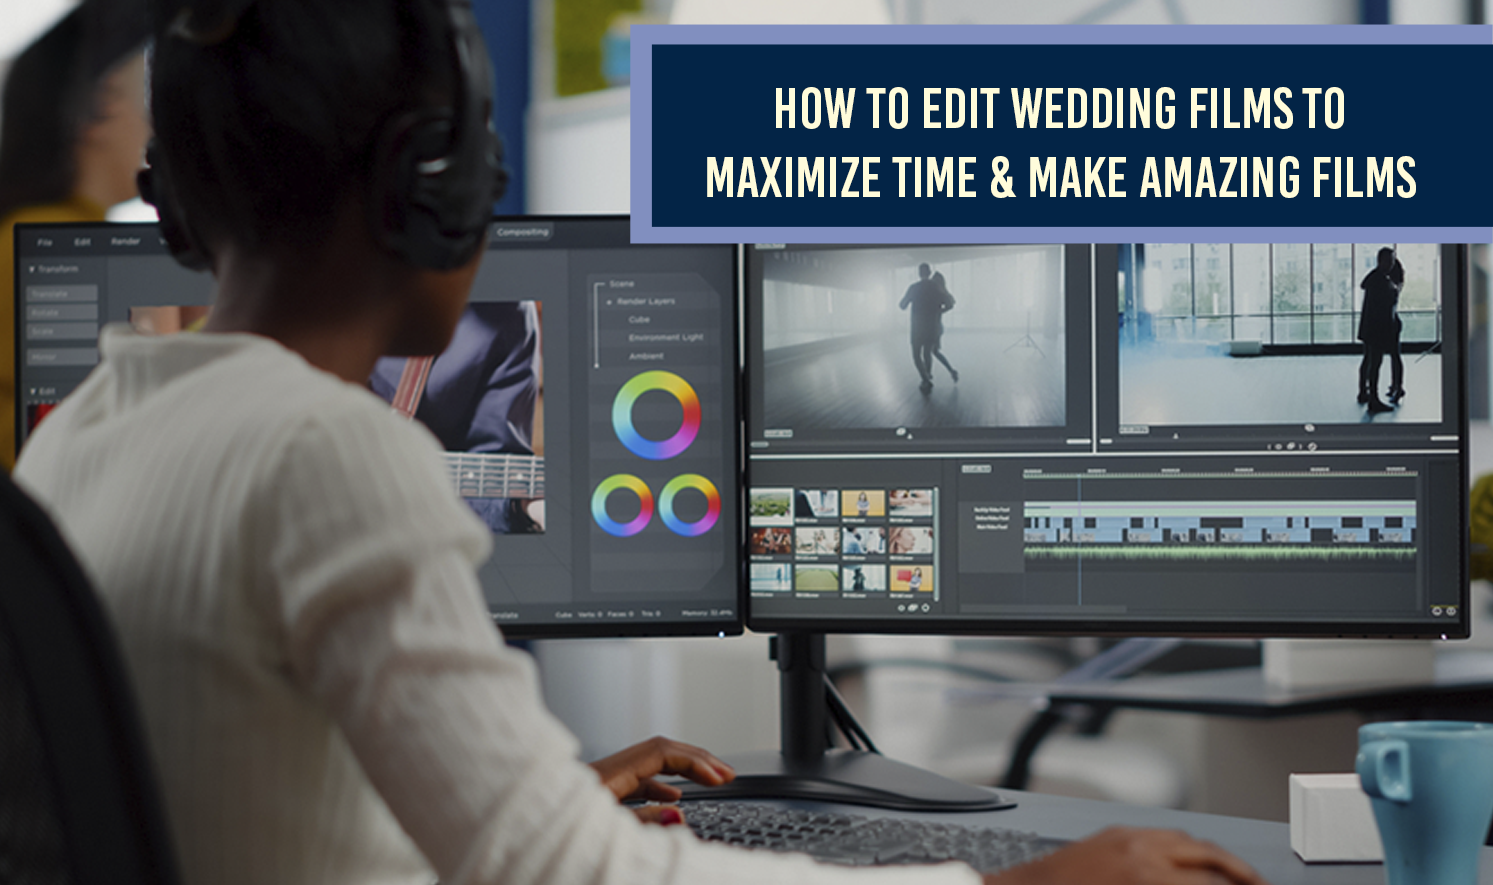 How to Edit Wedding Films to Maximize Time & Make Amazing Films